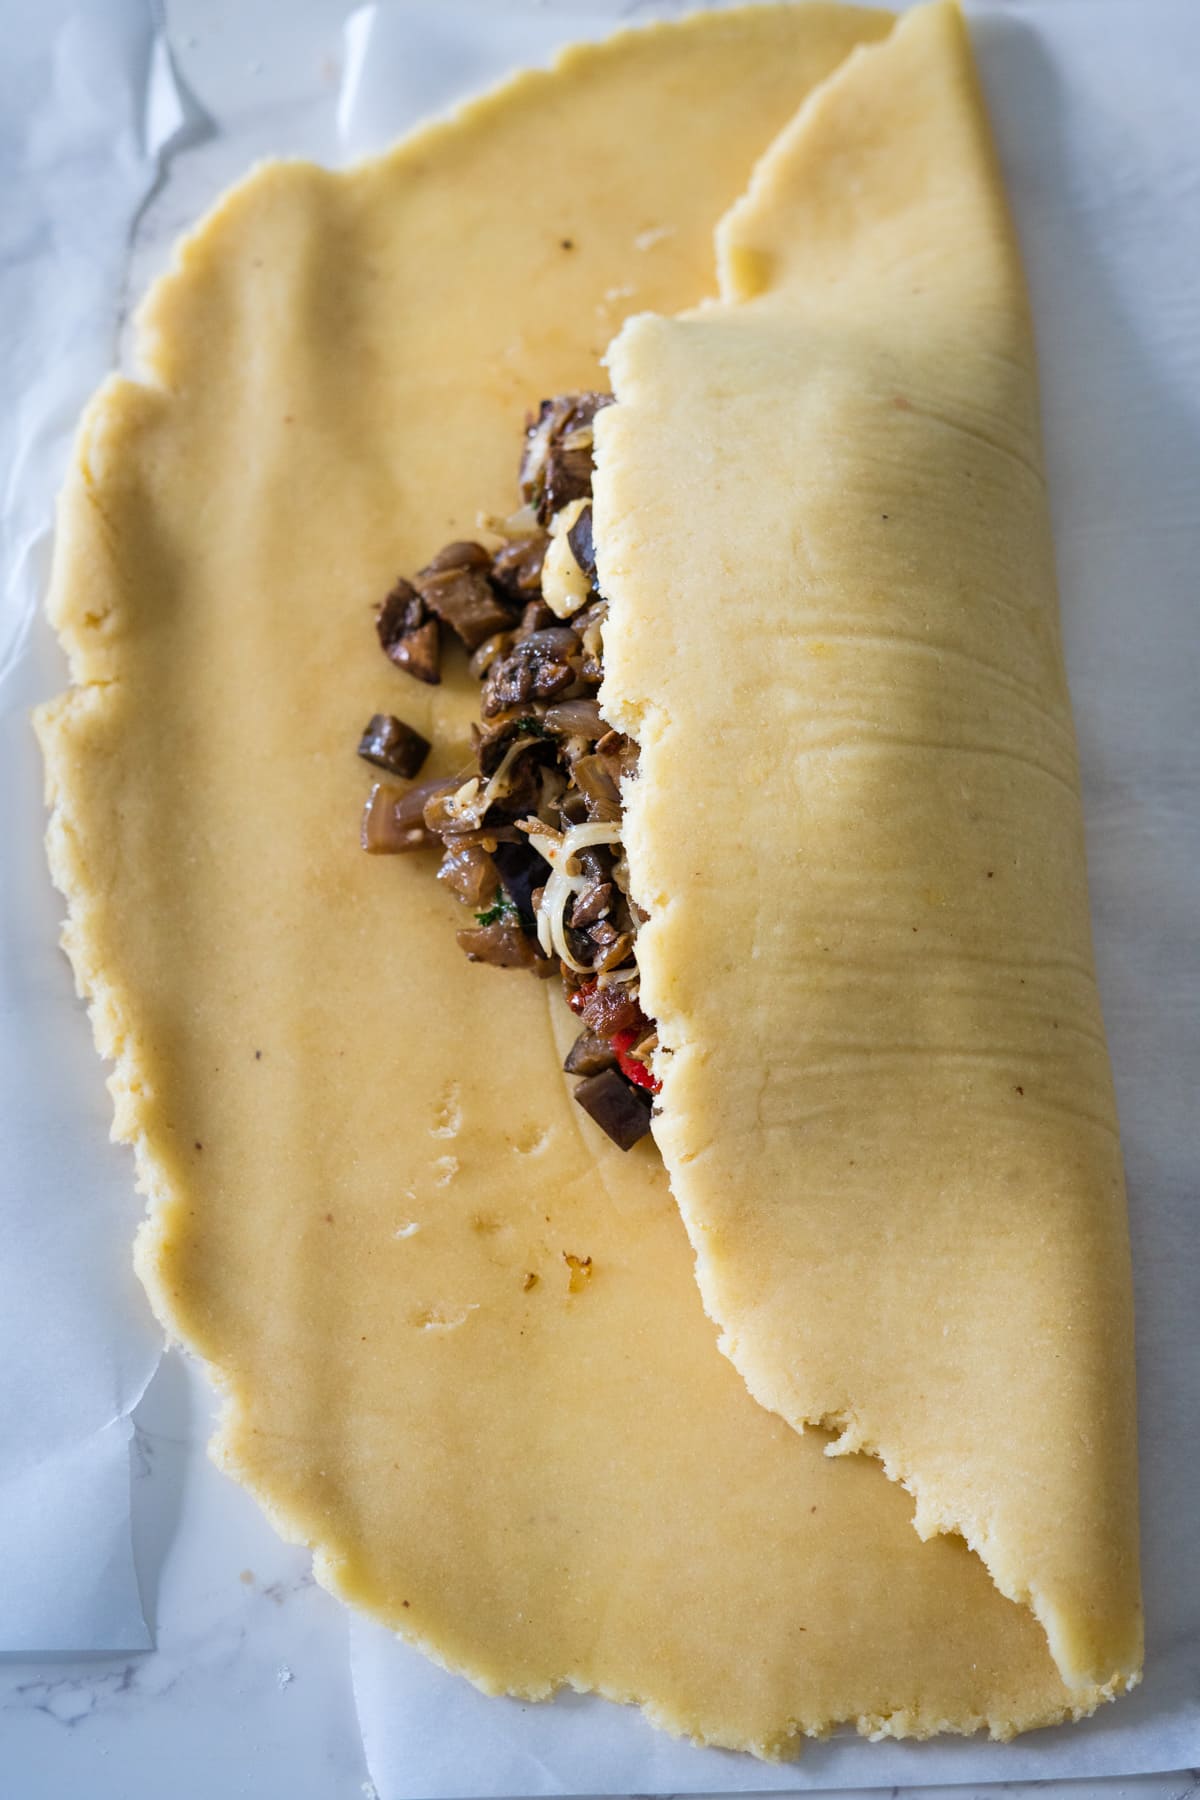 A vegetable wellington - a piece of dough with a filling on it that combines savory vegetables.